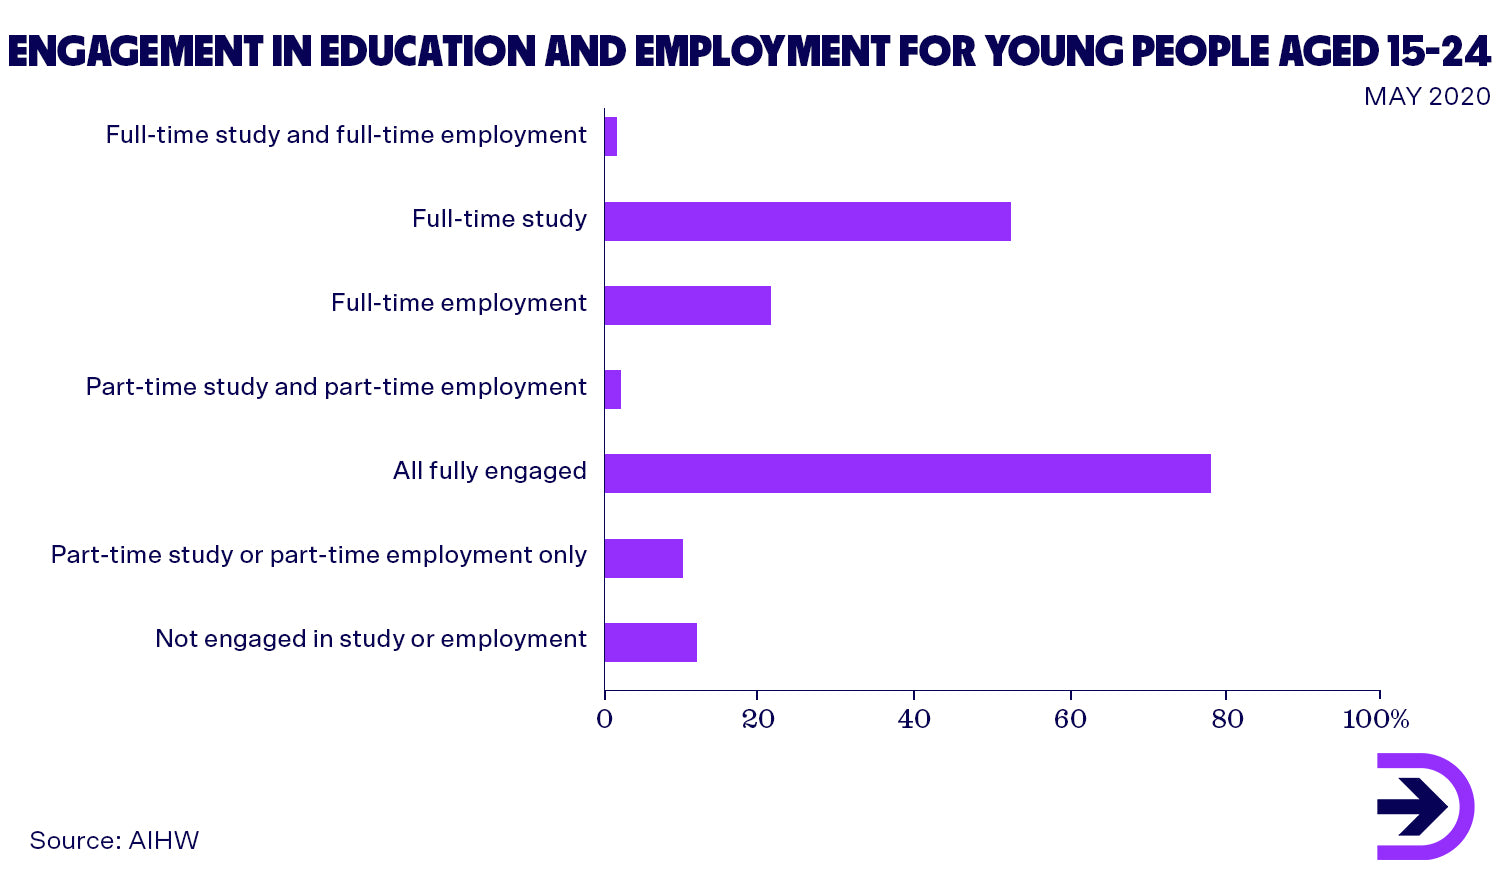 A bar graph highlighting the level of engagement in education and employment for people aged 15-18, as of May 2020.